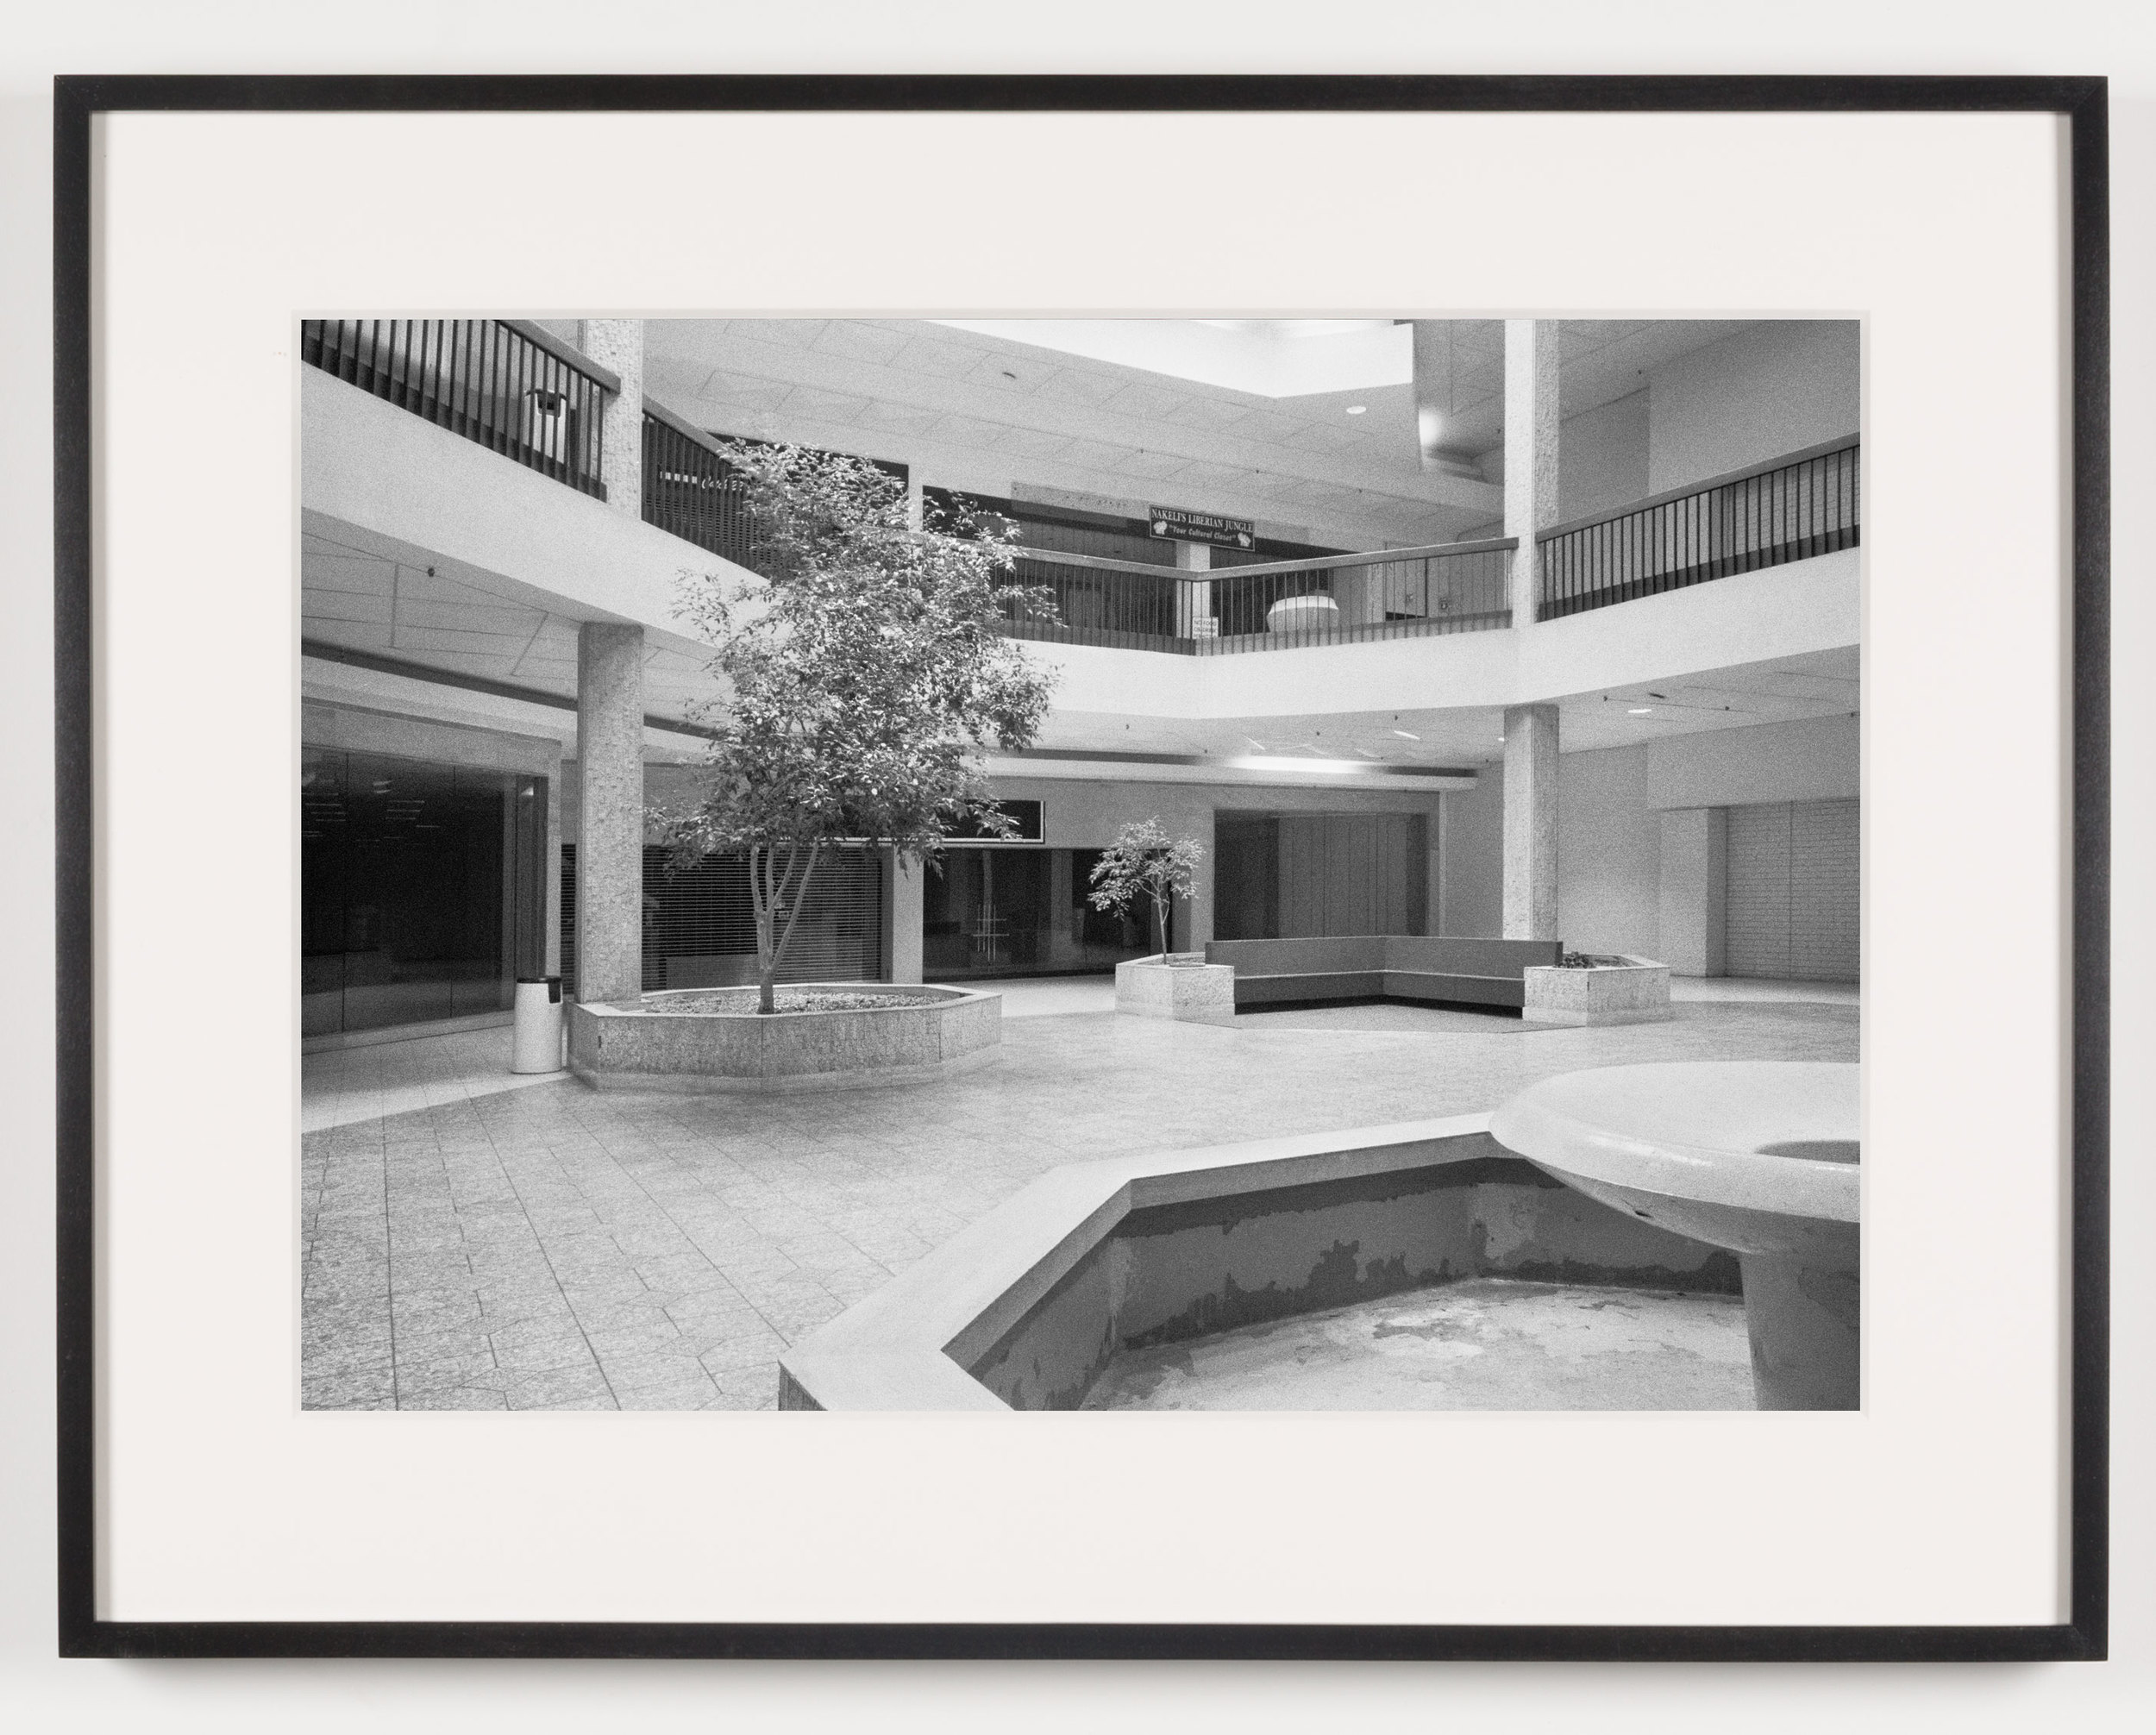   Randall Park Mall (View of Fountain, Seating Area), North Randall, OH, Est. 1976, Demo. 2014    2011   Epson Ultrachrome K3 archival ink jet print on Hahnemühle Photo Rag paper  21 5/8 x 28 1/8 inches   American Passages, 2001–2011     